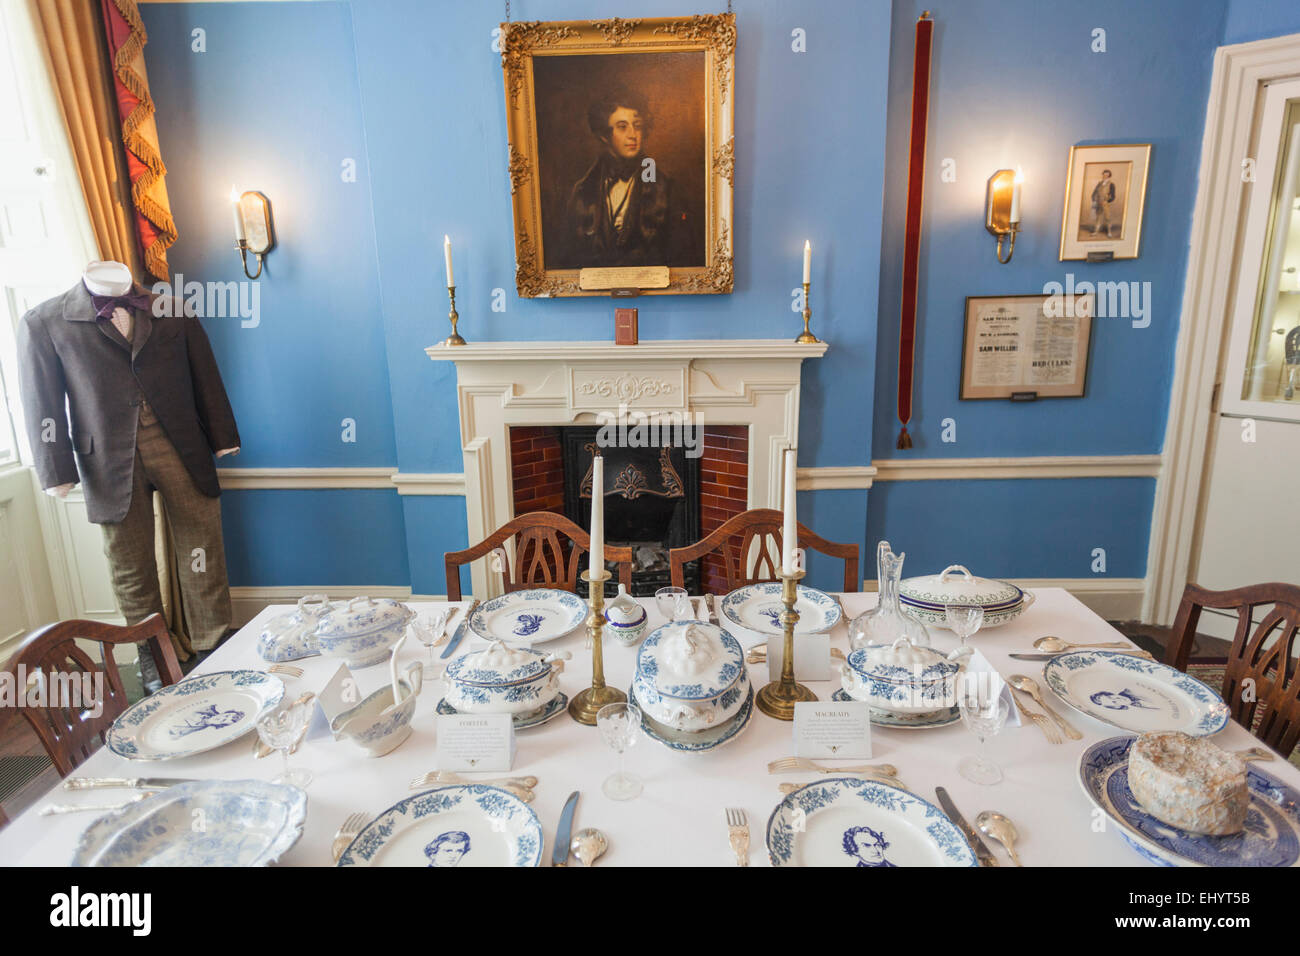 England, London, Charles Dickens Museum, Dining Room Display Stock Photo